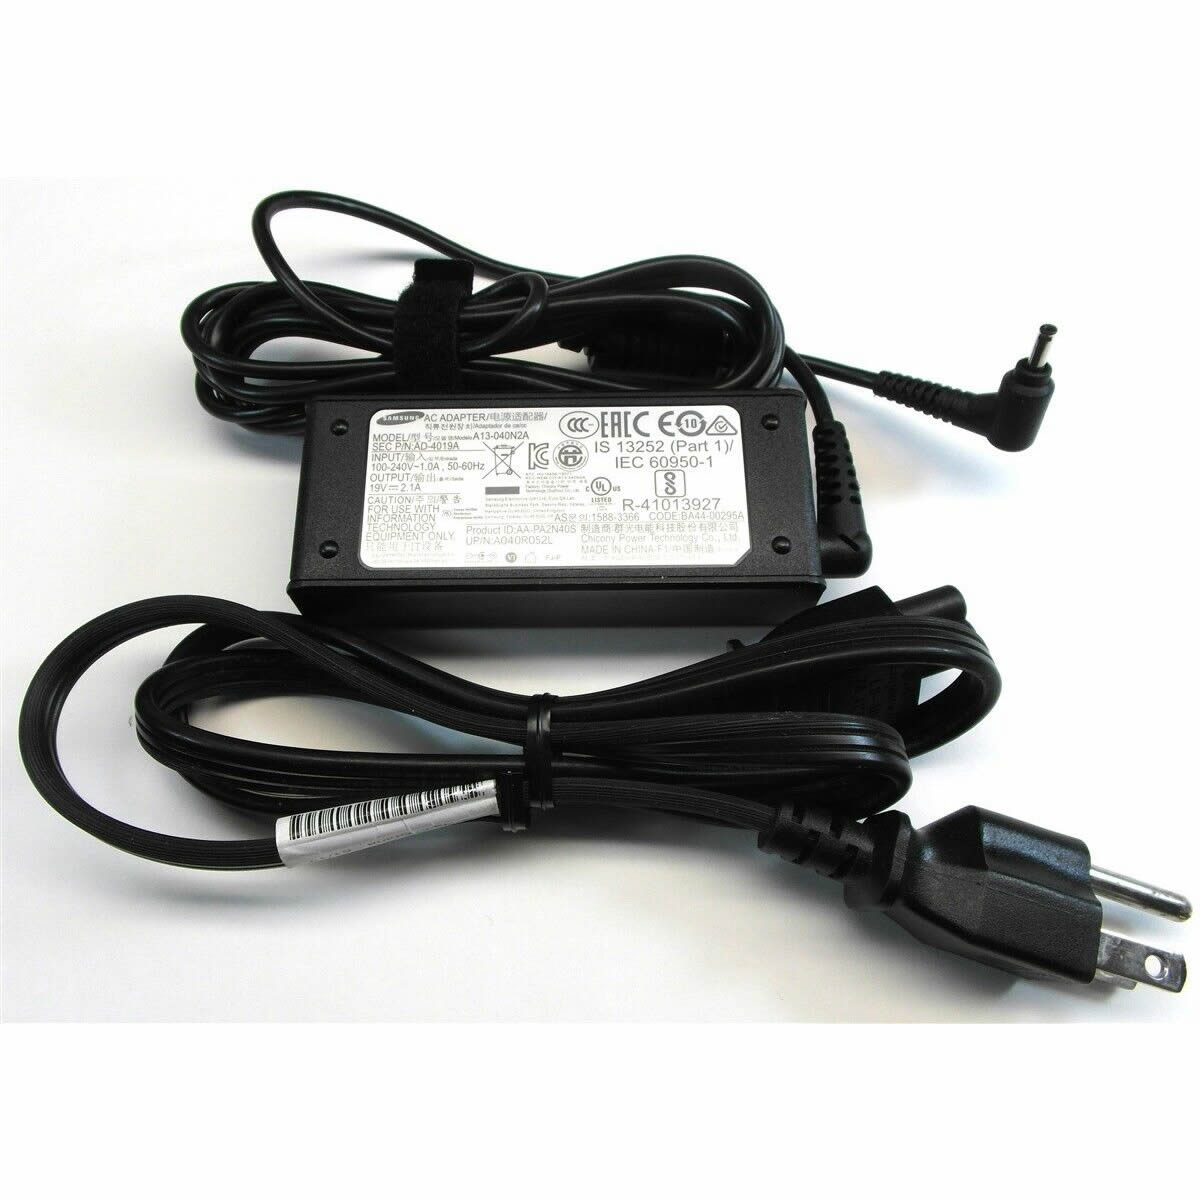 a13-040n2a laptop ac adapter